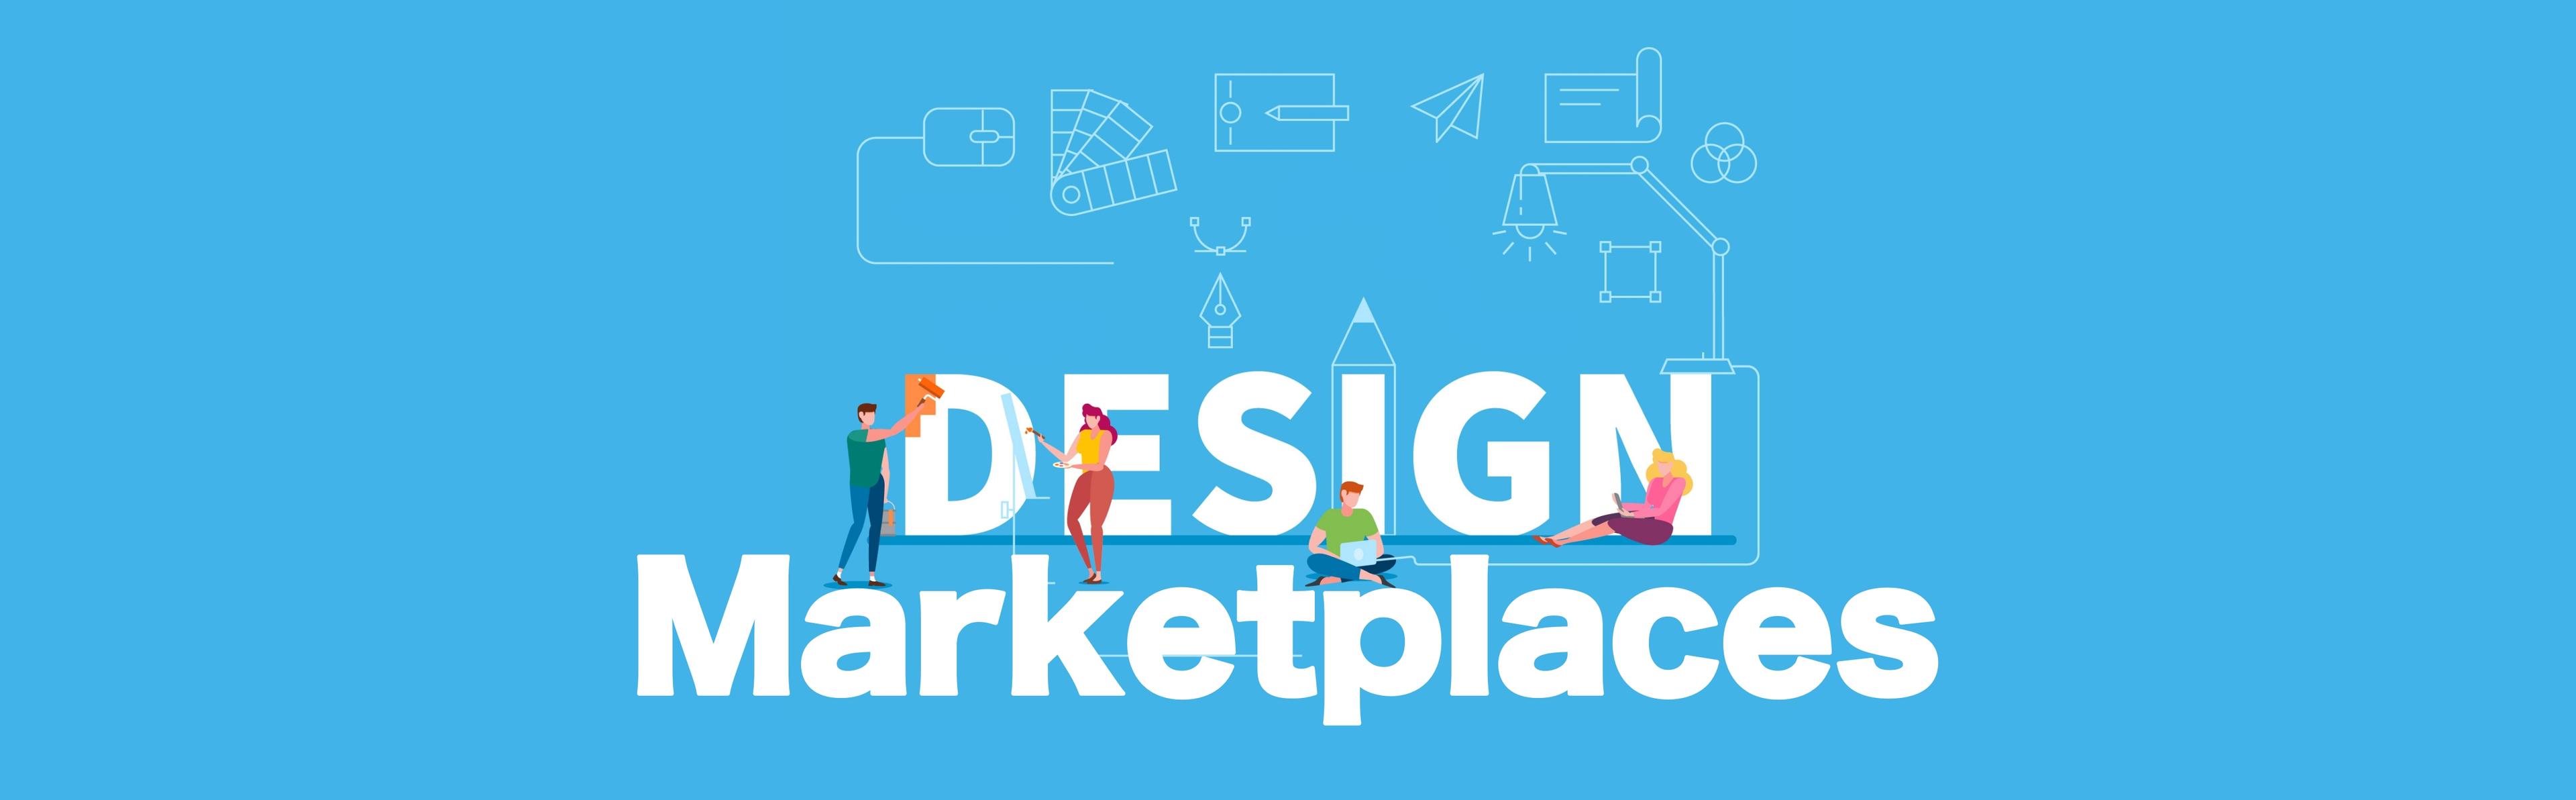 Design Marketplaces: Do You Get What You Pay for? - Superside